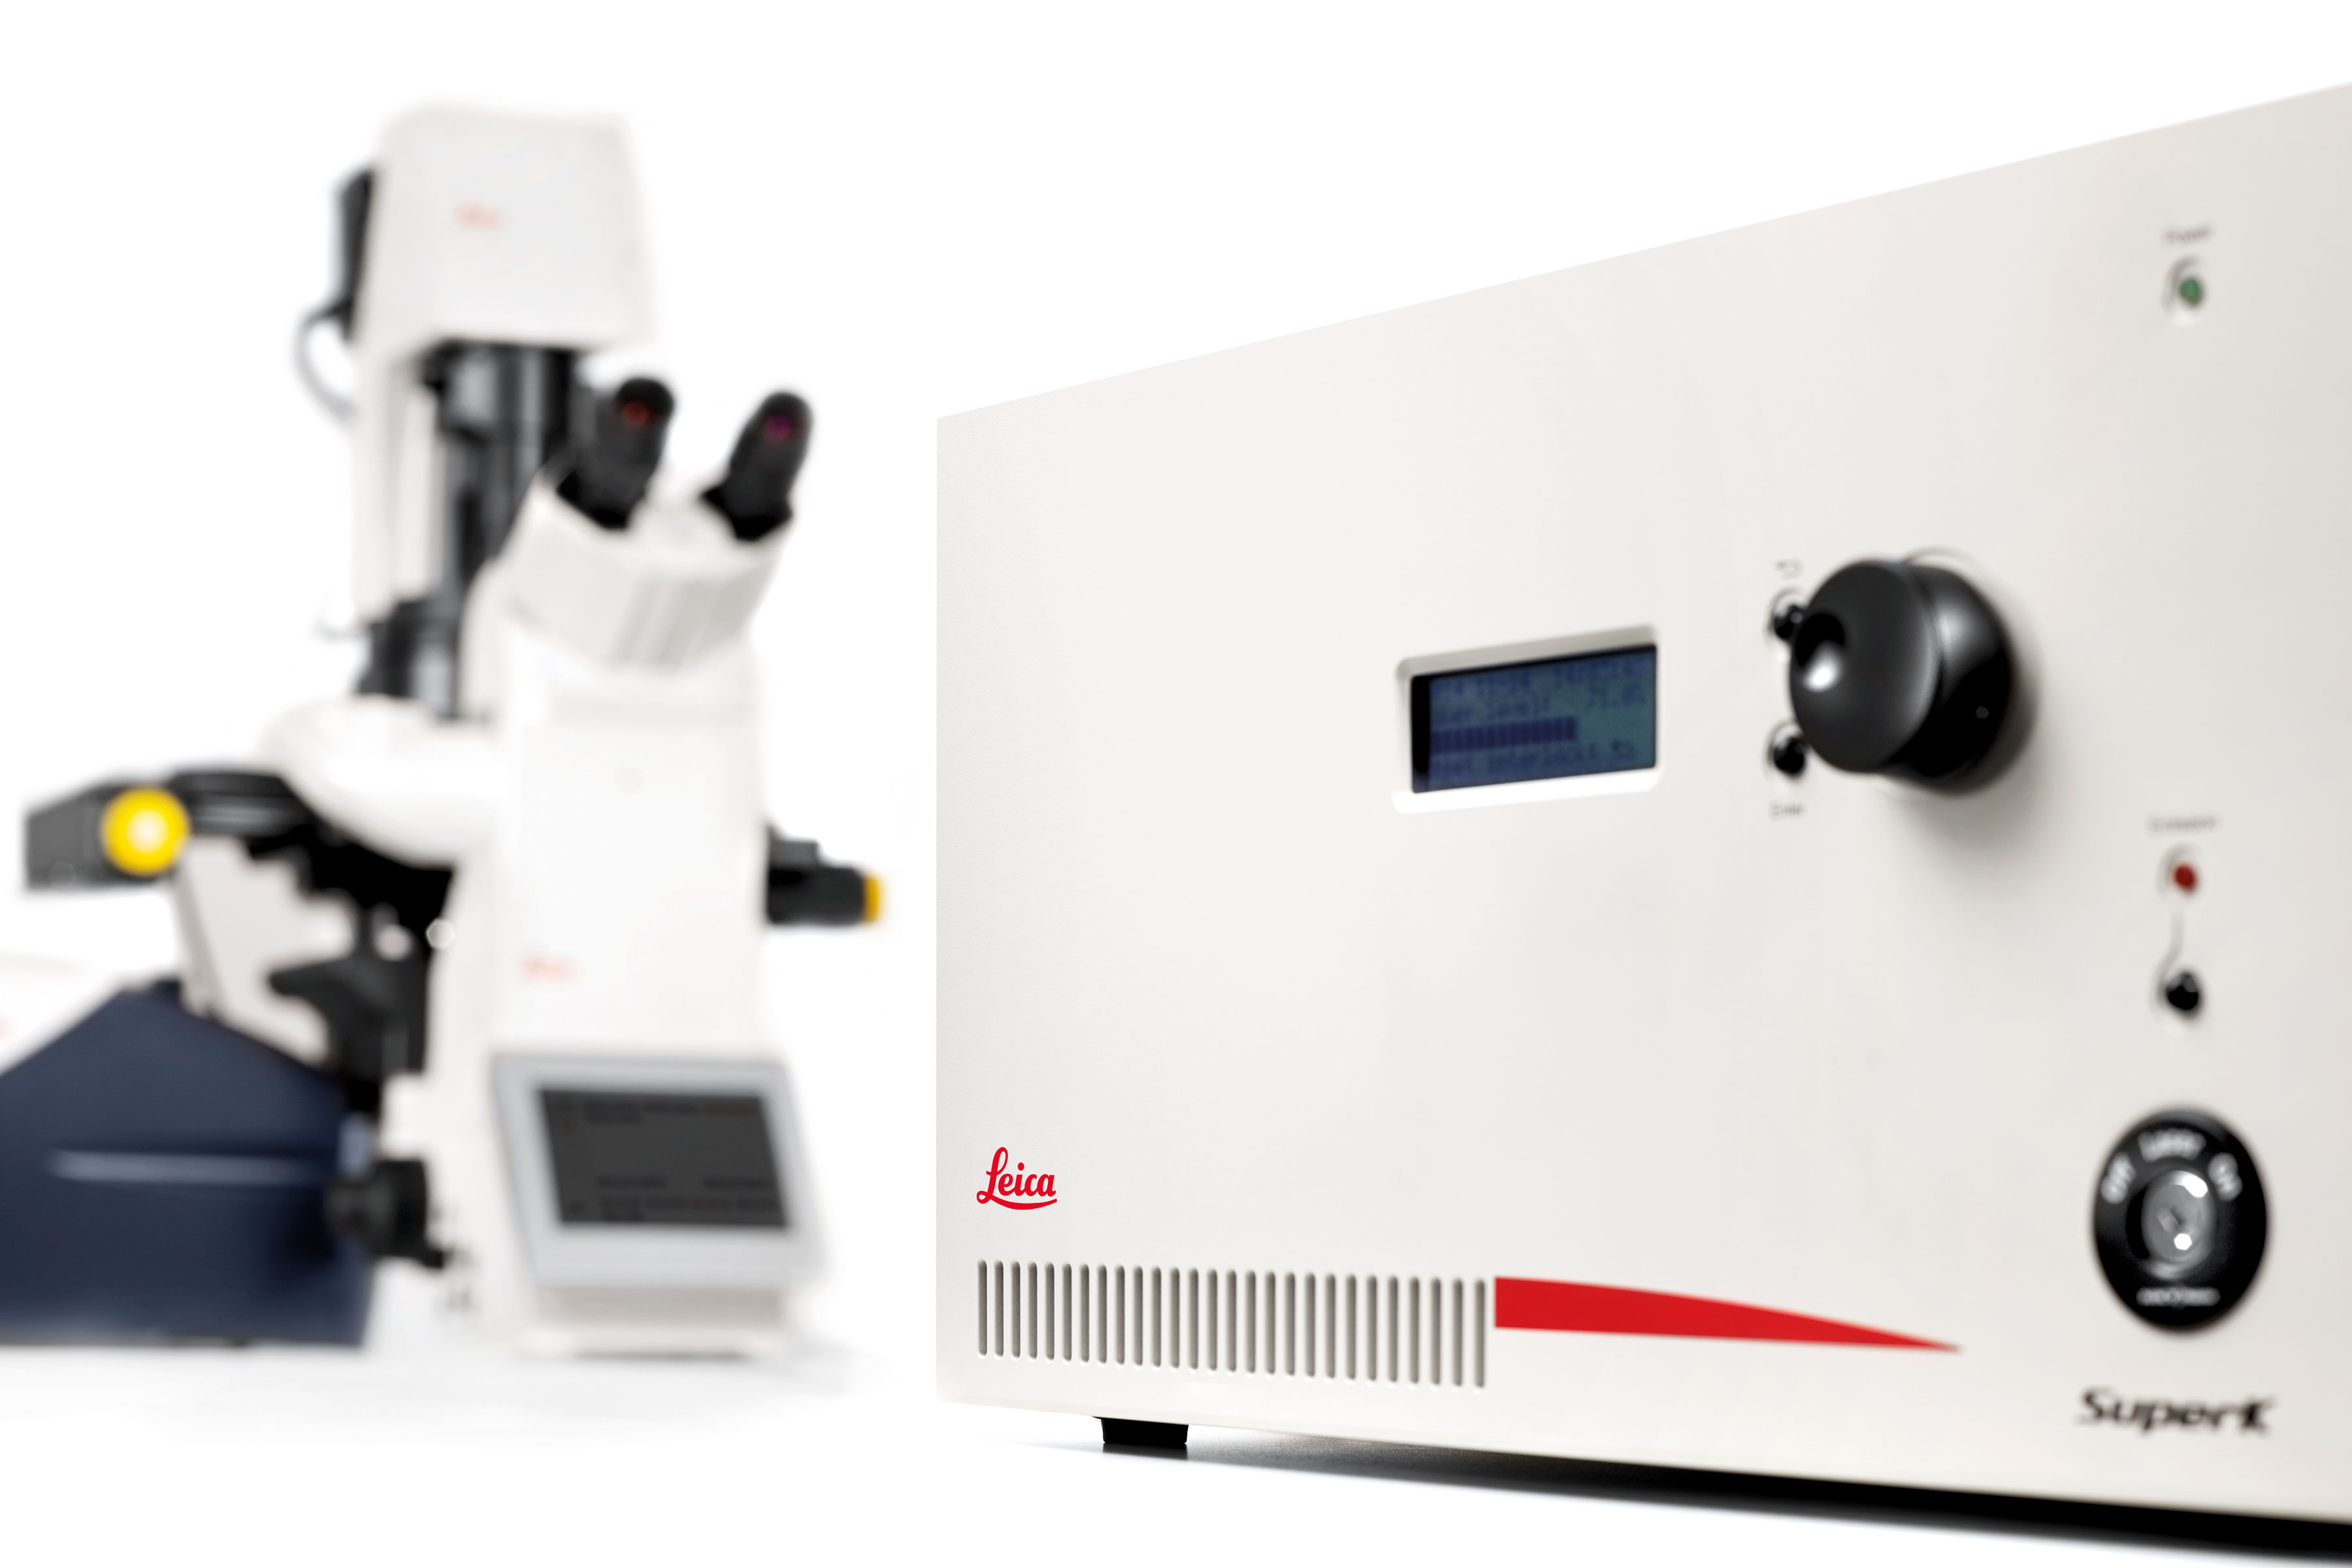 Leica TCS SP8 X Spectral Characterization